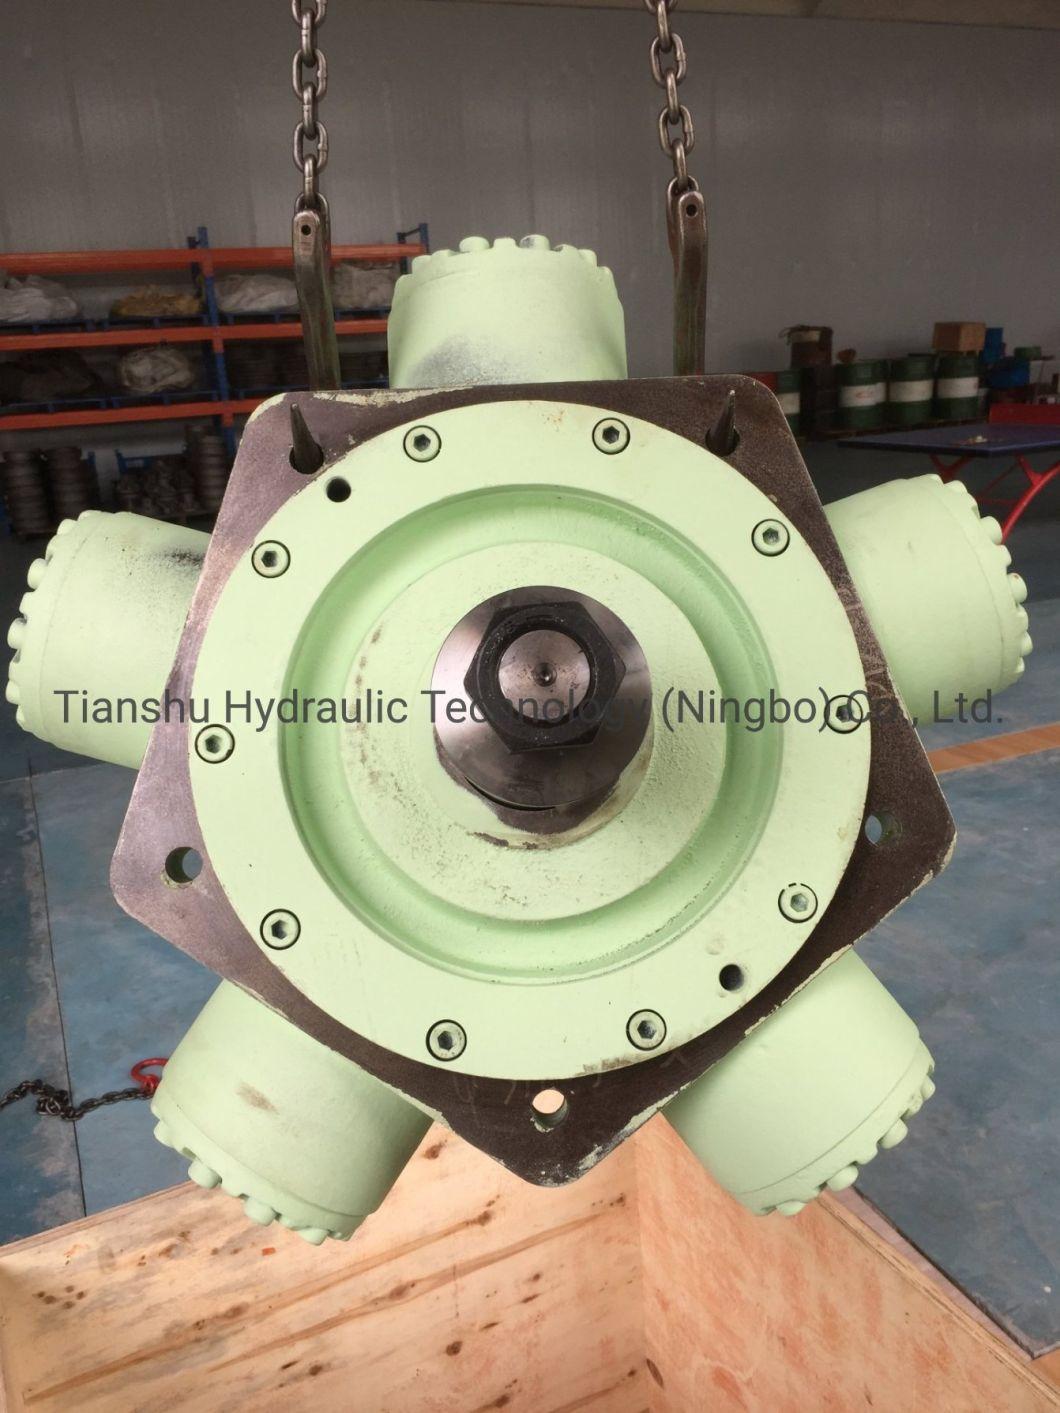 Single Speed & Two Speed Fix and Replacement for Kawasaki Staffa Hmb150 Hmb200 Hmb270 Hmb325 Hmb400 Hmb700 Hydraulic Motor